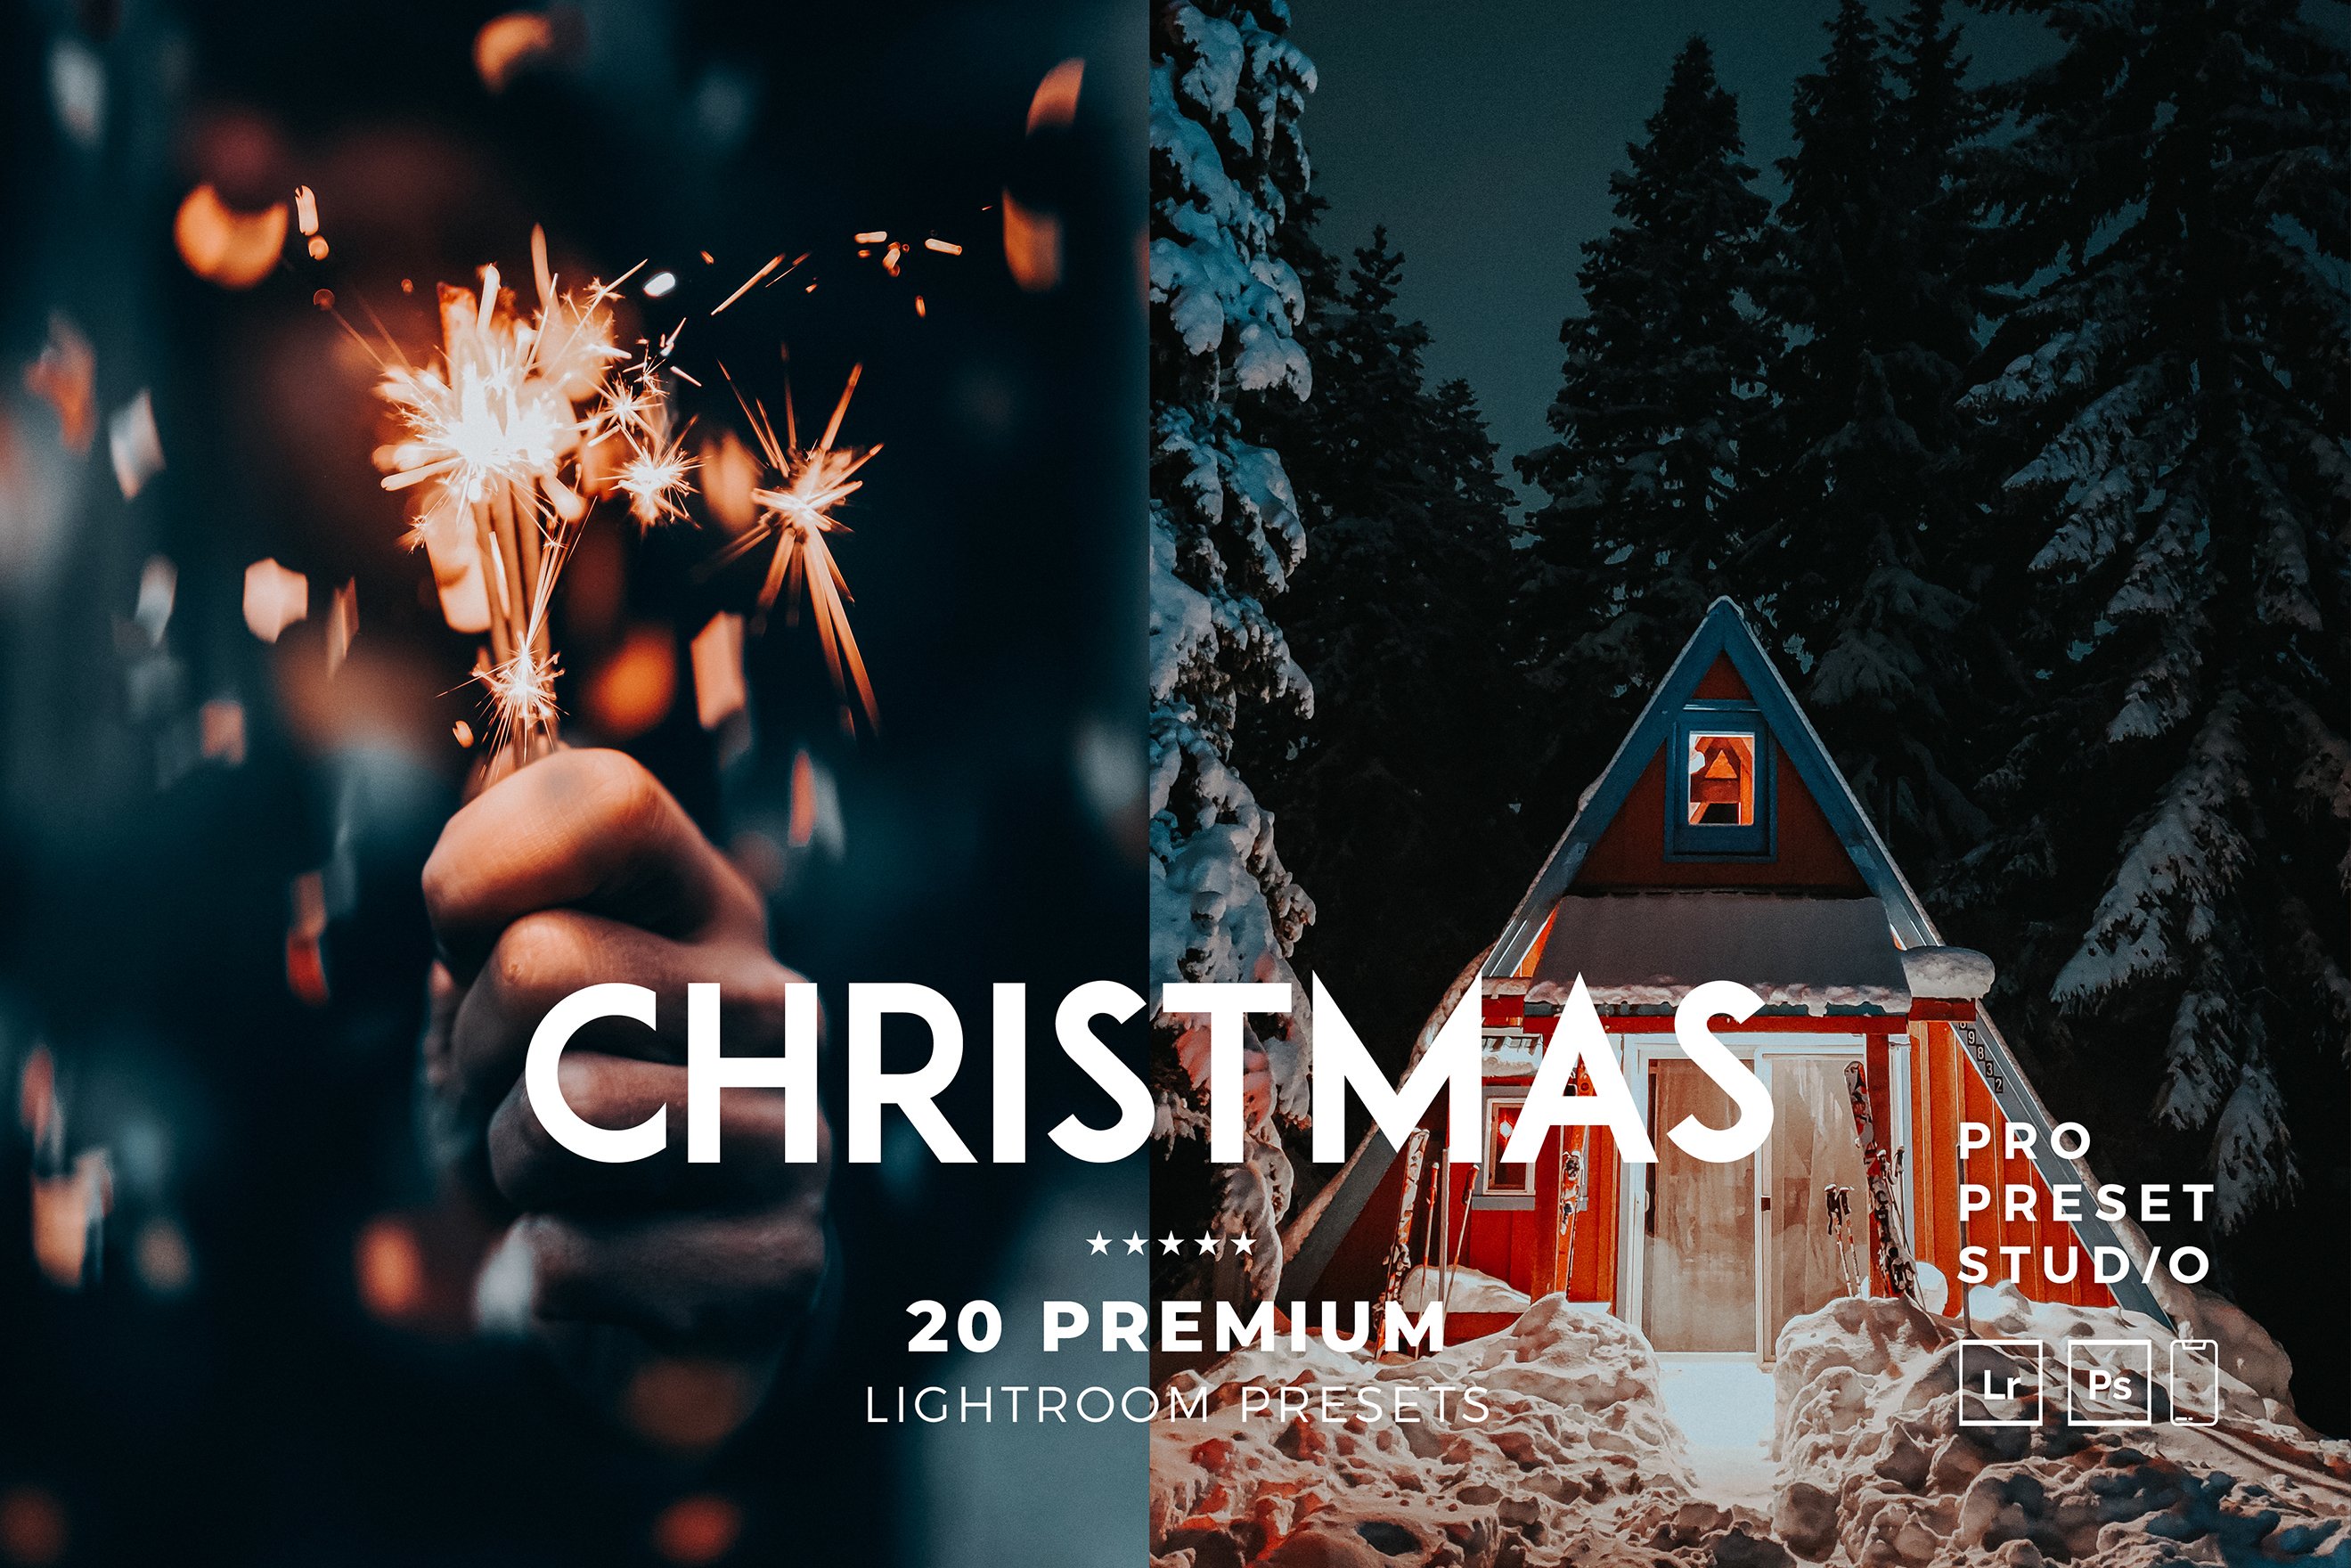 Christmas Presets for Lightroomcover image.